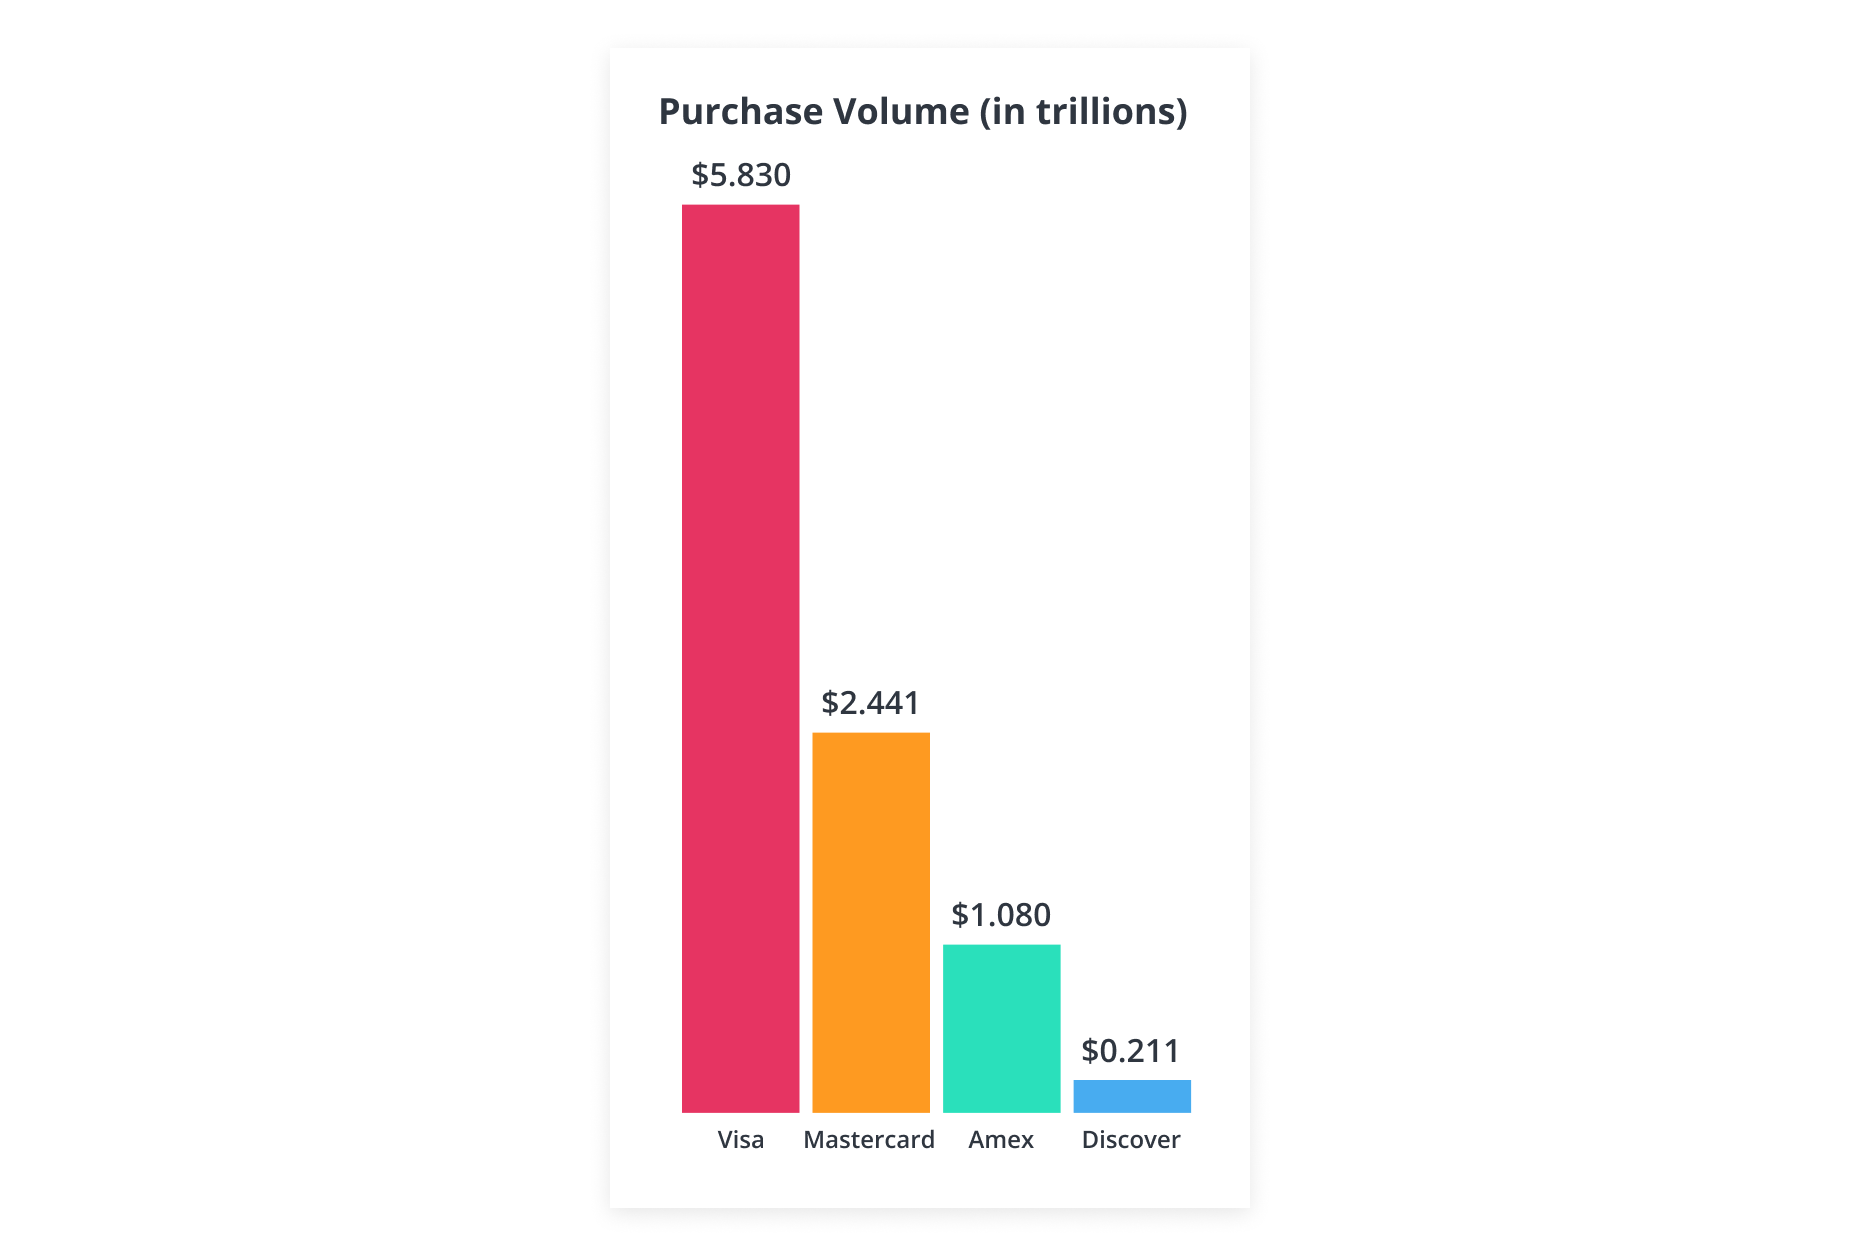 Purchase volume for Visa, Mastercard, AmEx, and Discover 2022